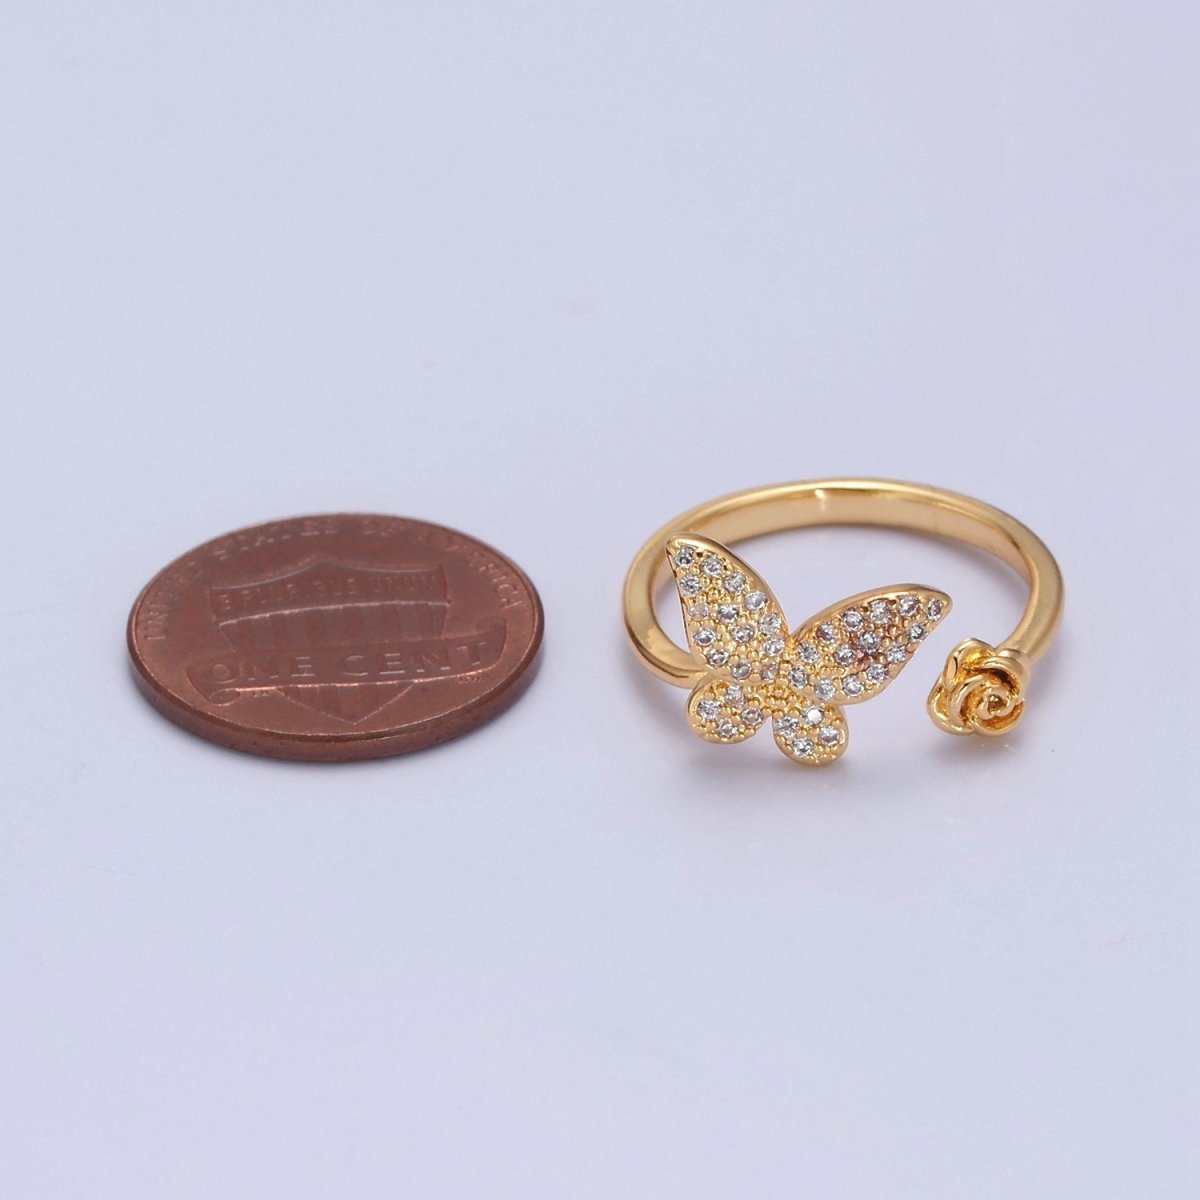 Dainty Butterfly Ring, Adjustable Gold Ring, Micro Pave CZ Mariposa Ring, Animal Lover Ring for Minimalist jewelry Everyday Wear O-2143 - DLUXCA